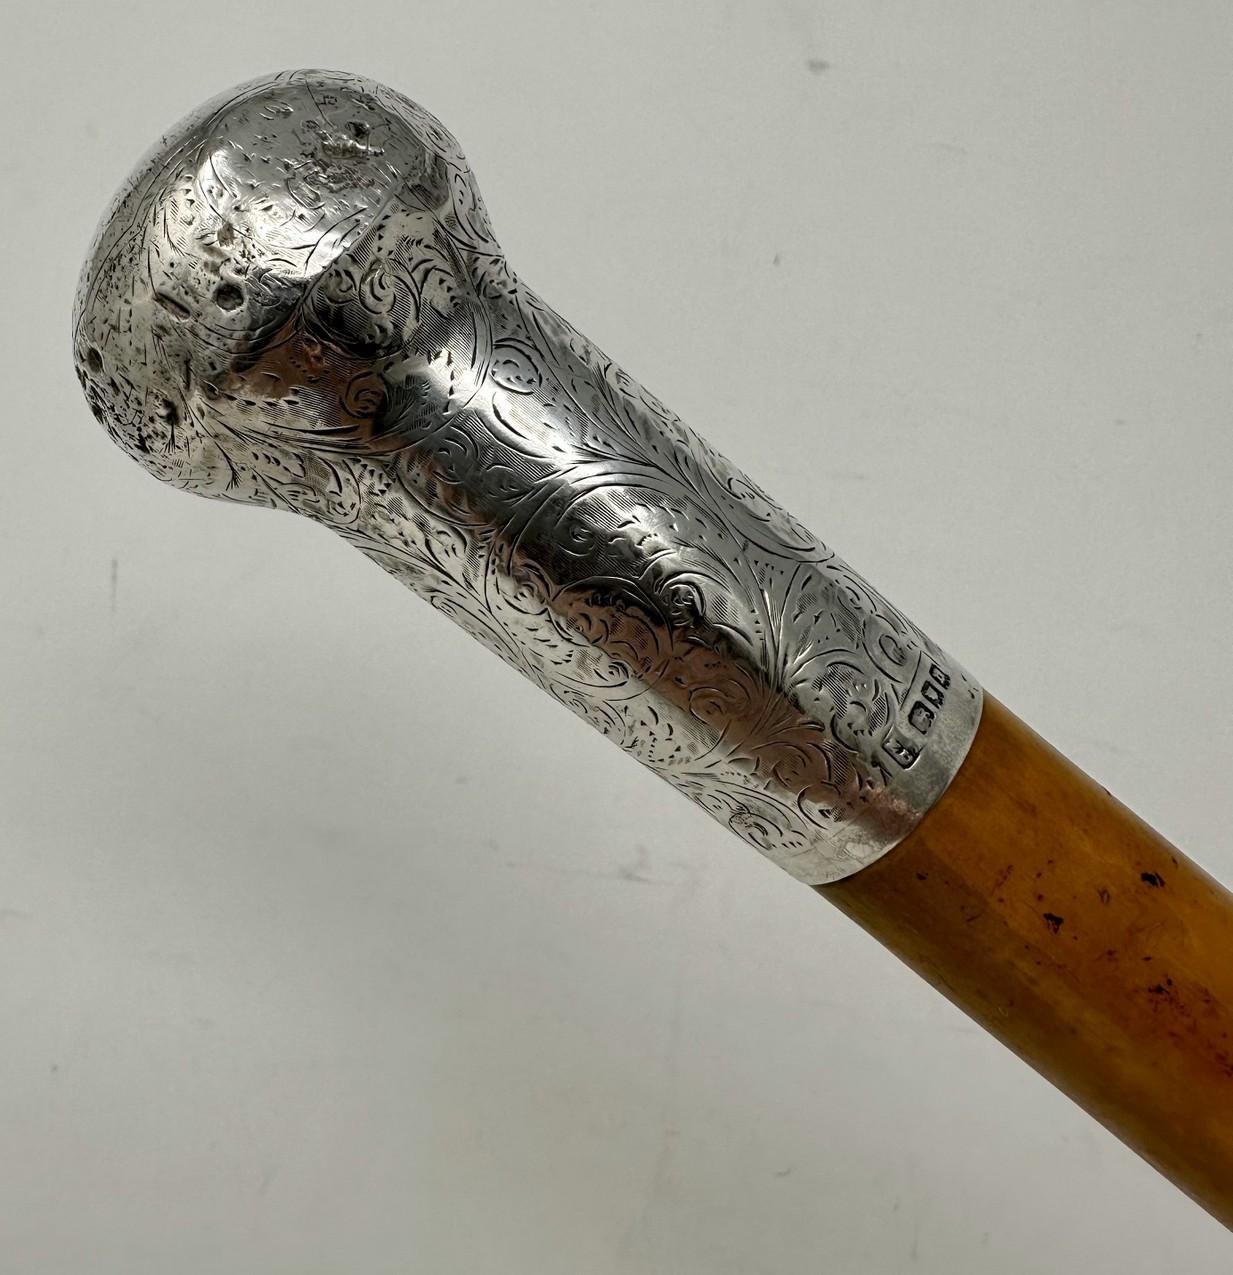 British Antique Malacca Wooden English Walking Swagger Stick Cane Sterling Silver London